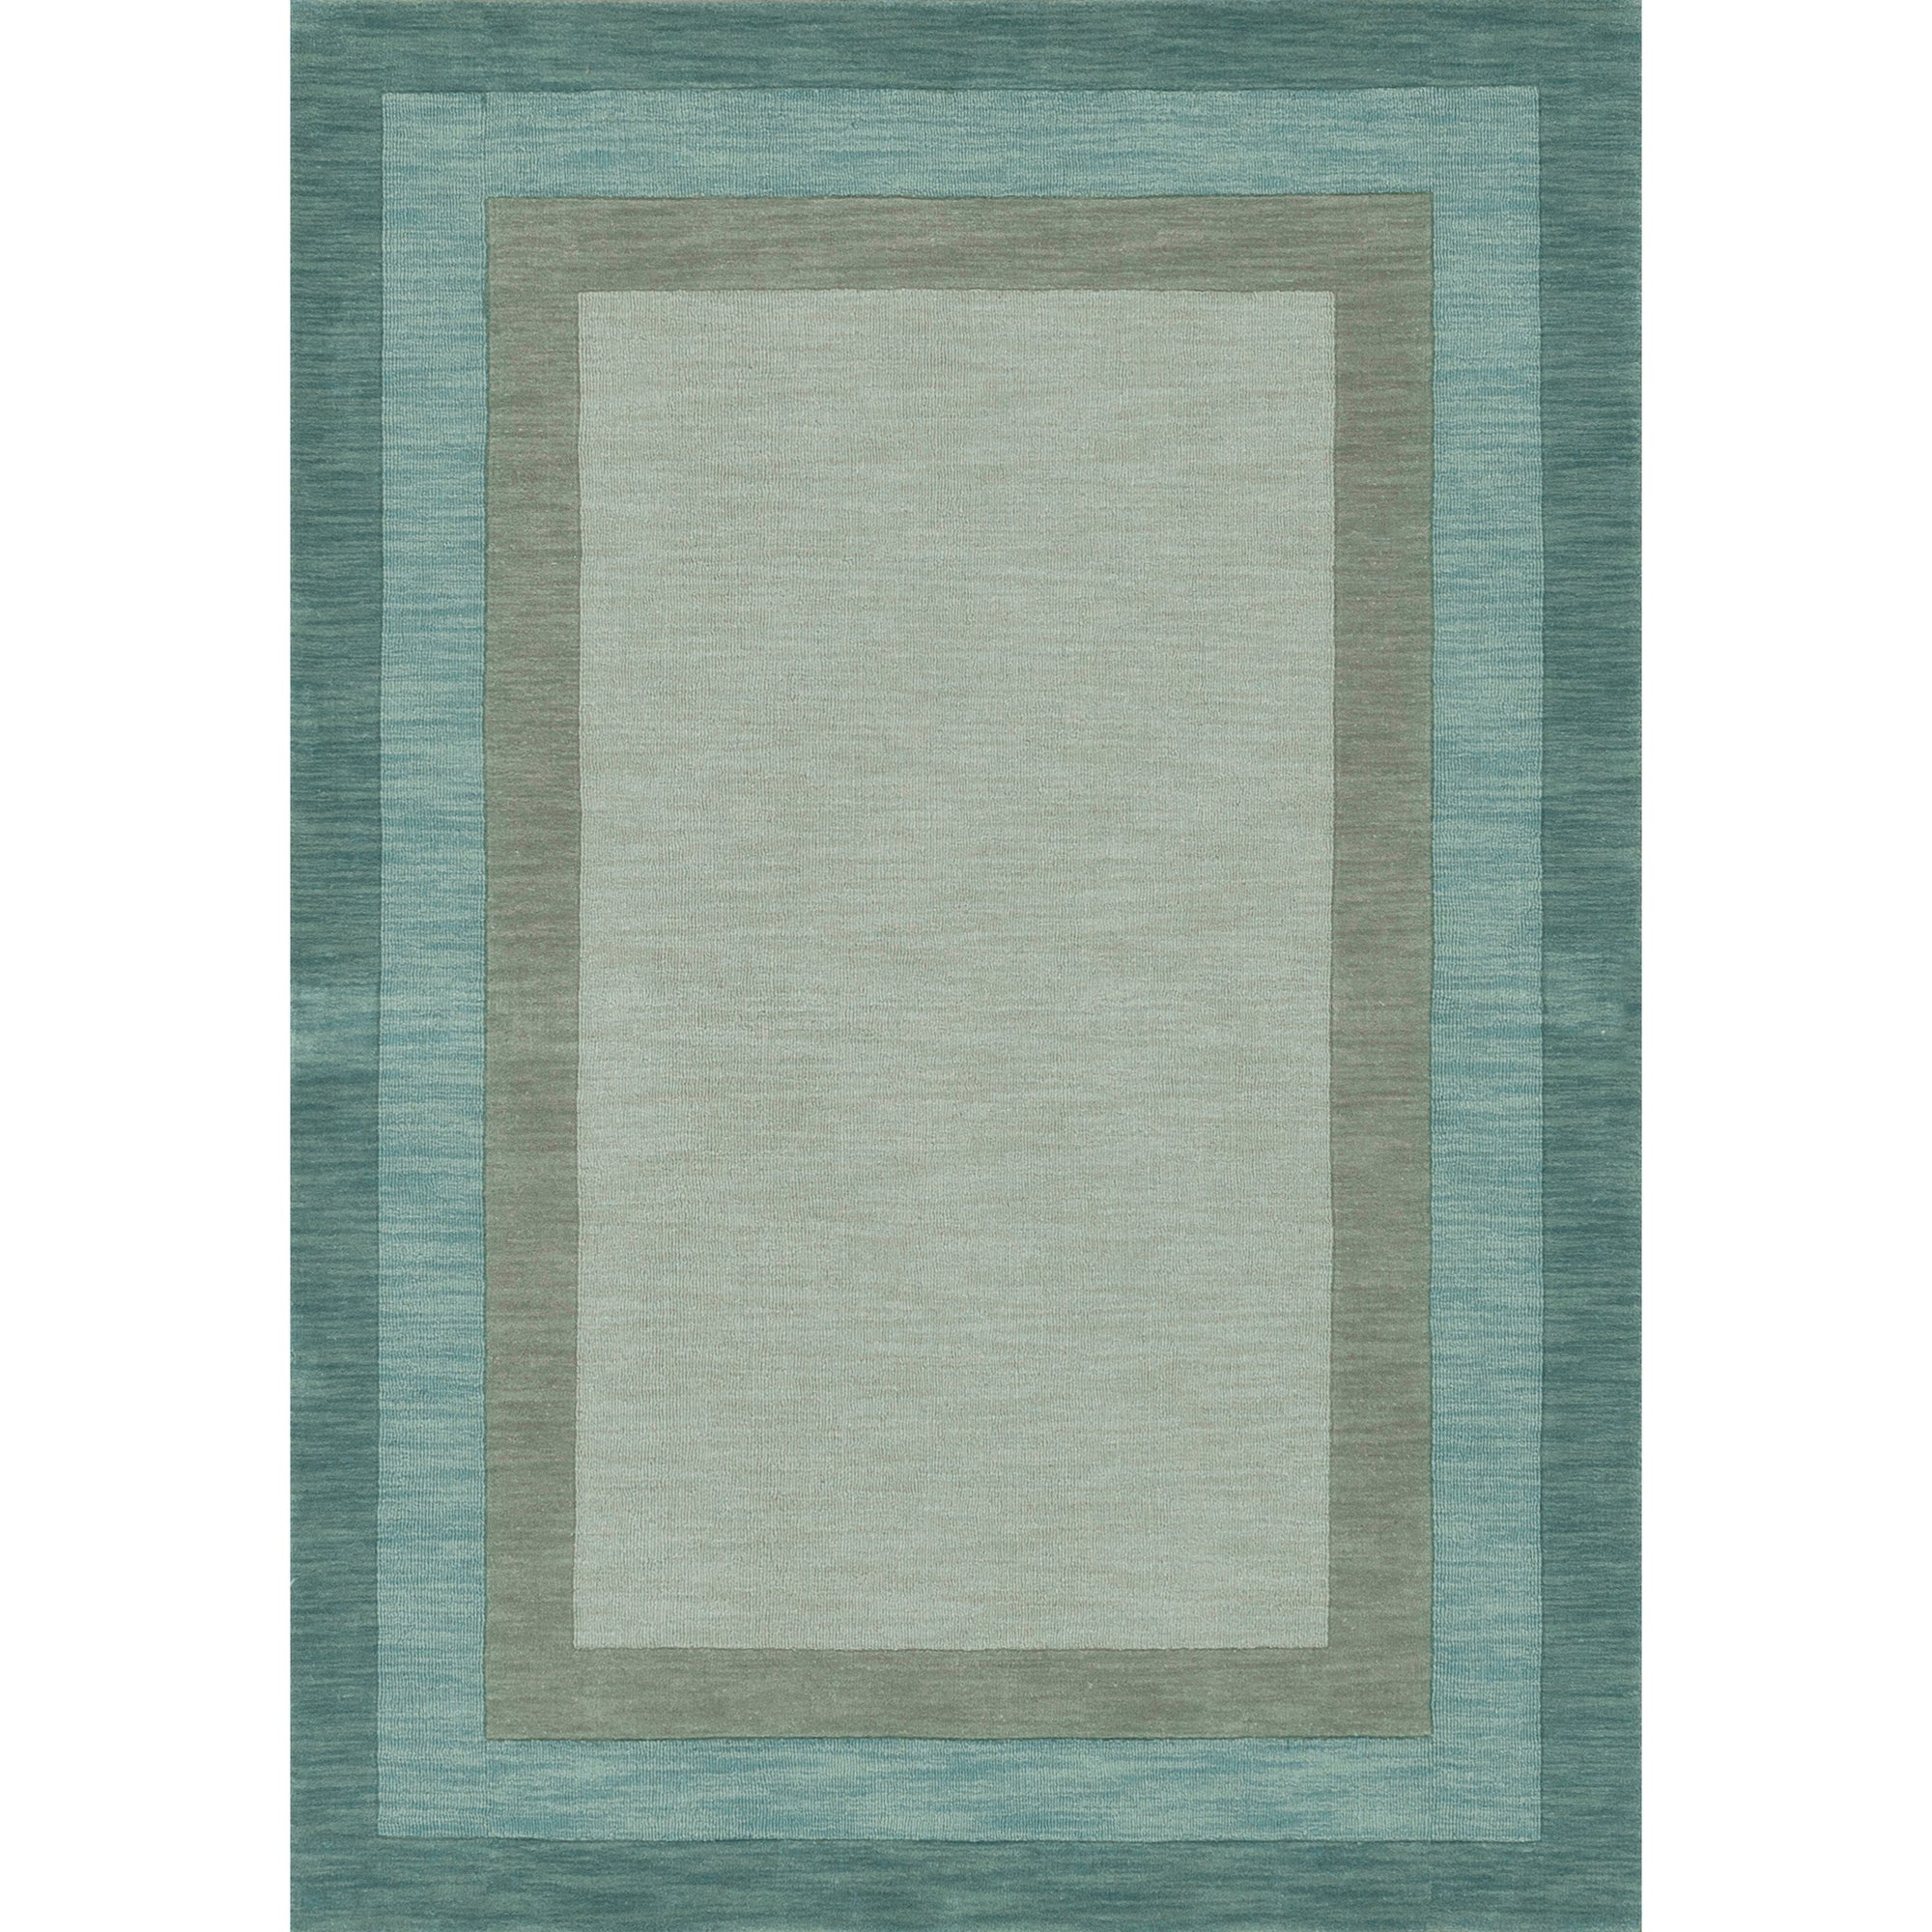 Rugs by Roo Loloi Hamilton Fern Area Rug in size 18" x 18" Sample